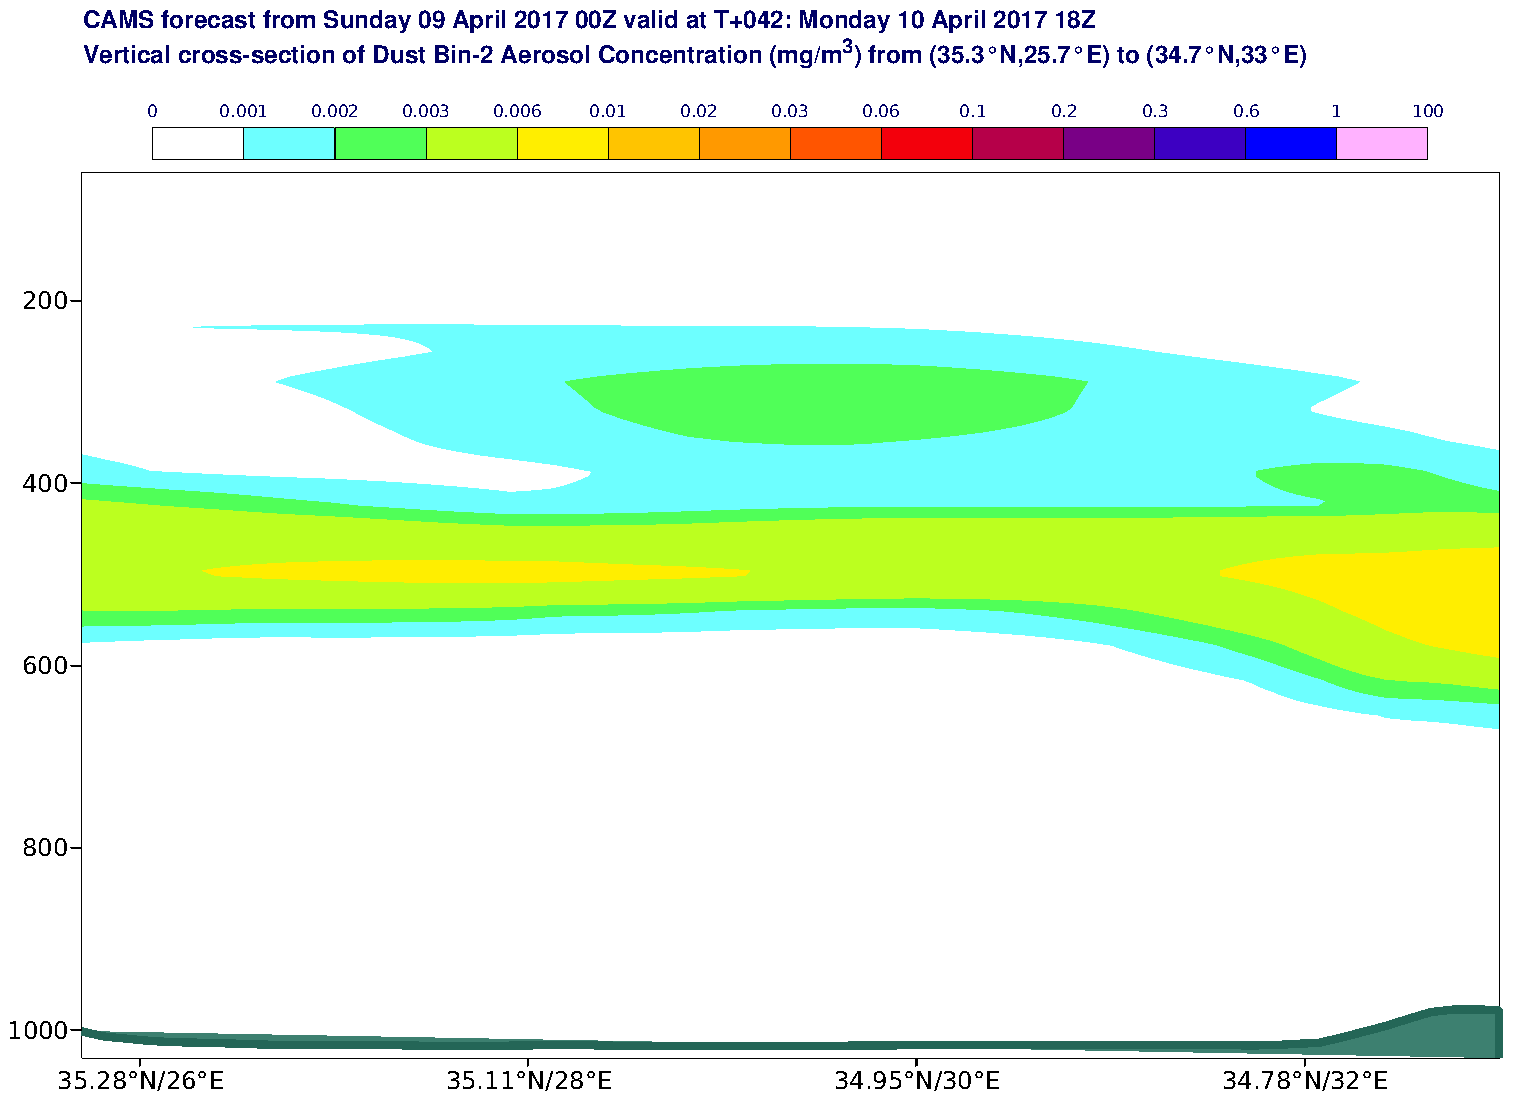 Vertical cross-section of Dust Bin-2 Aerosol Concentration (mg/m3) valid at T42 - 2017-04-10 18:00